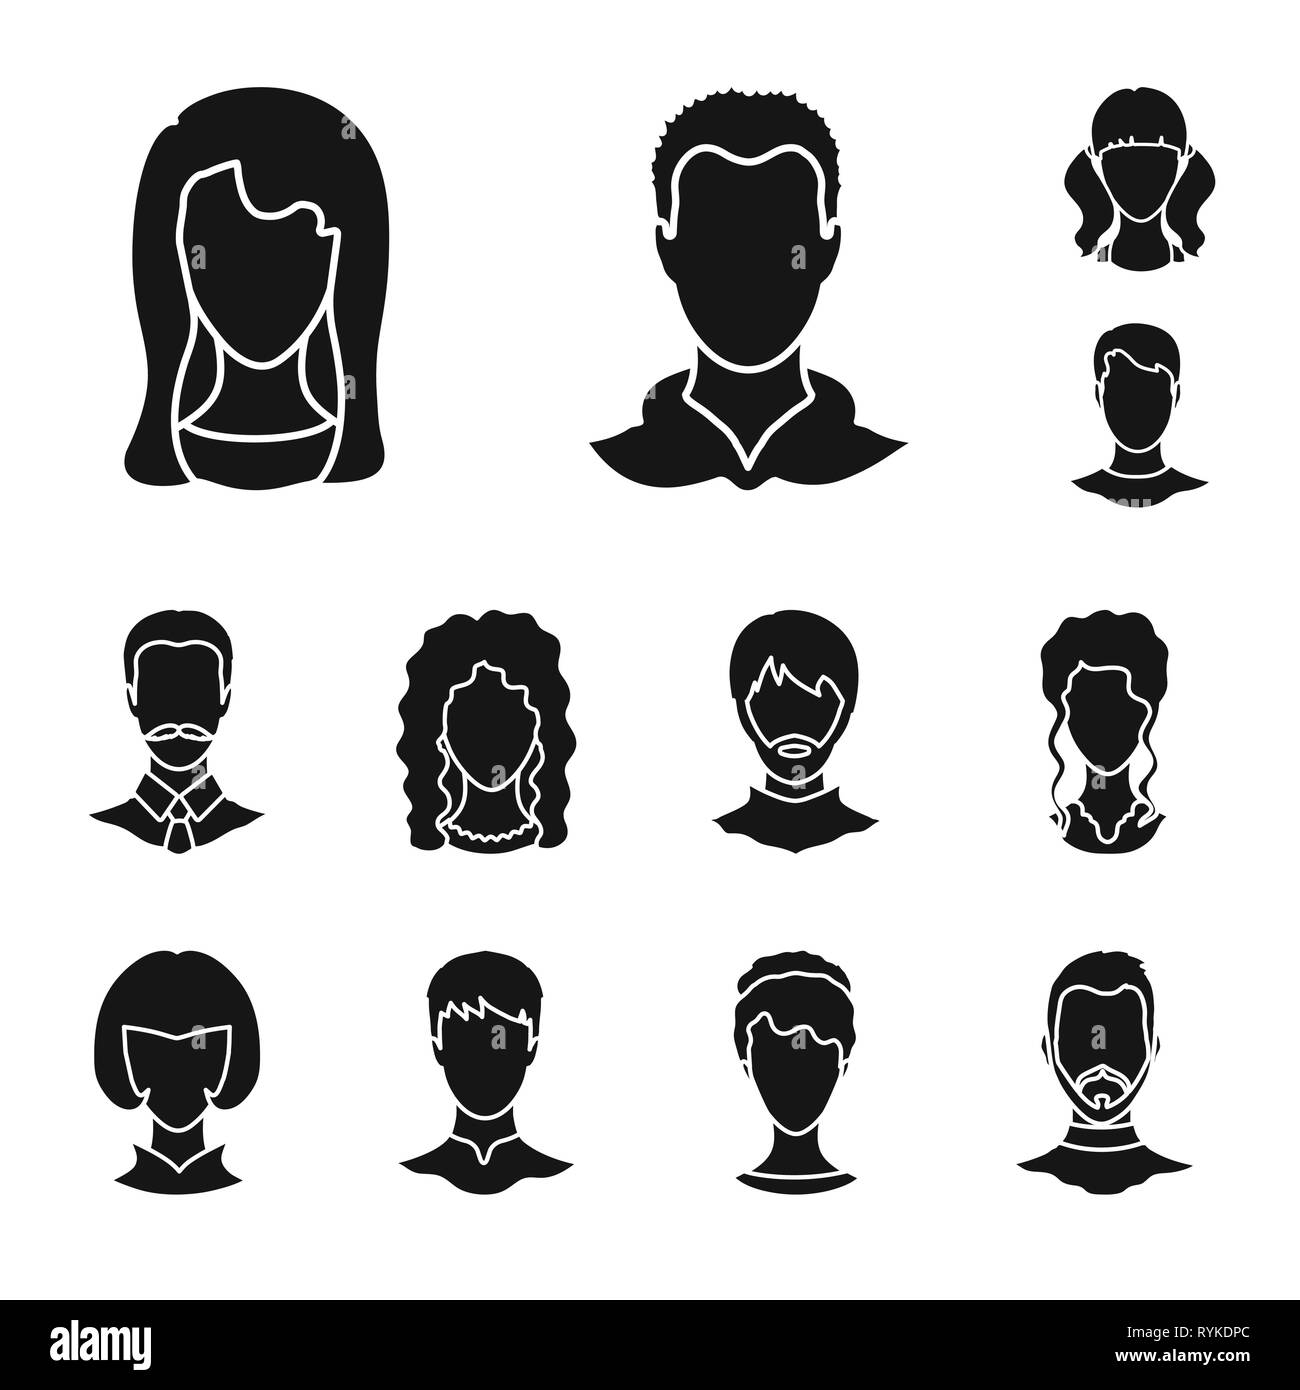 Vector design of character and profile logo. Collection of character and dummy stock vector illustration. Stock Vector